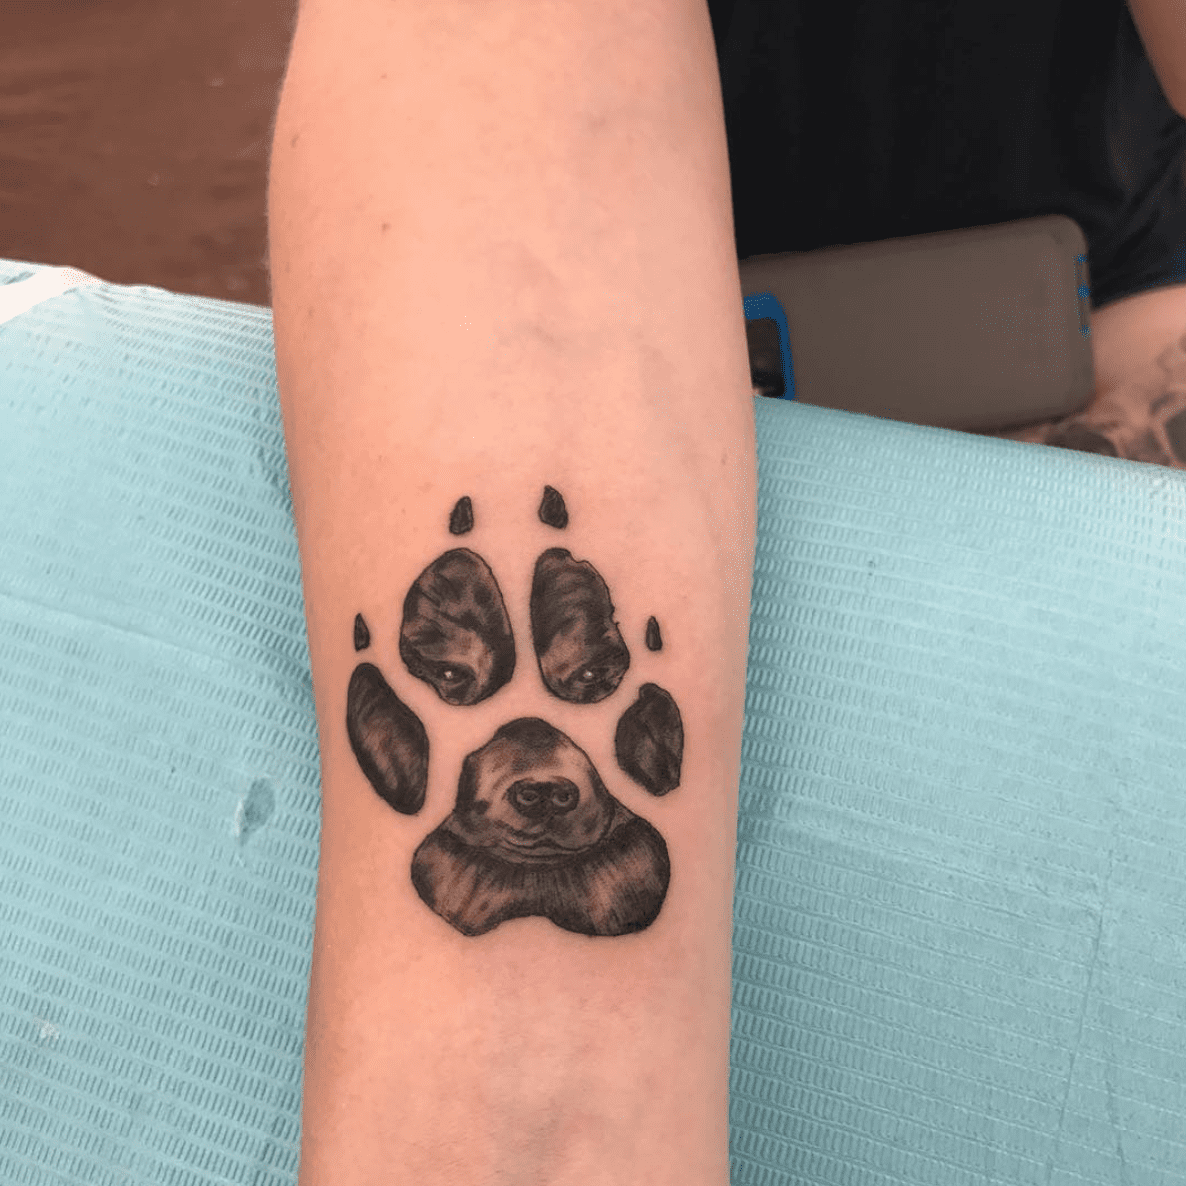 10 Awesome Dog Paw Tattoos You Must See! — Simple Dog Logic